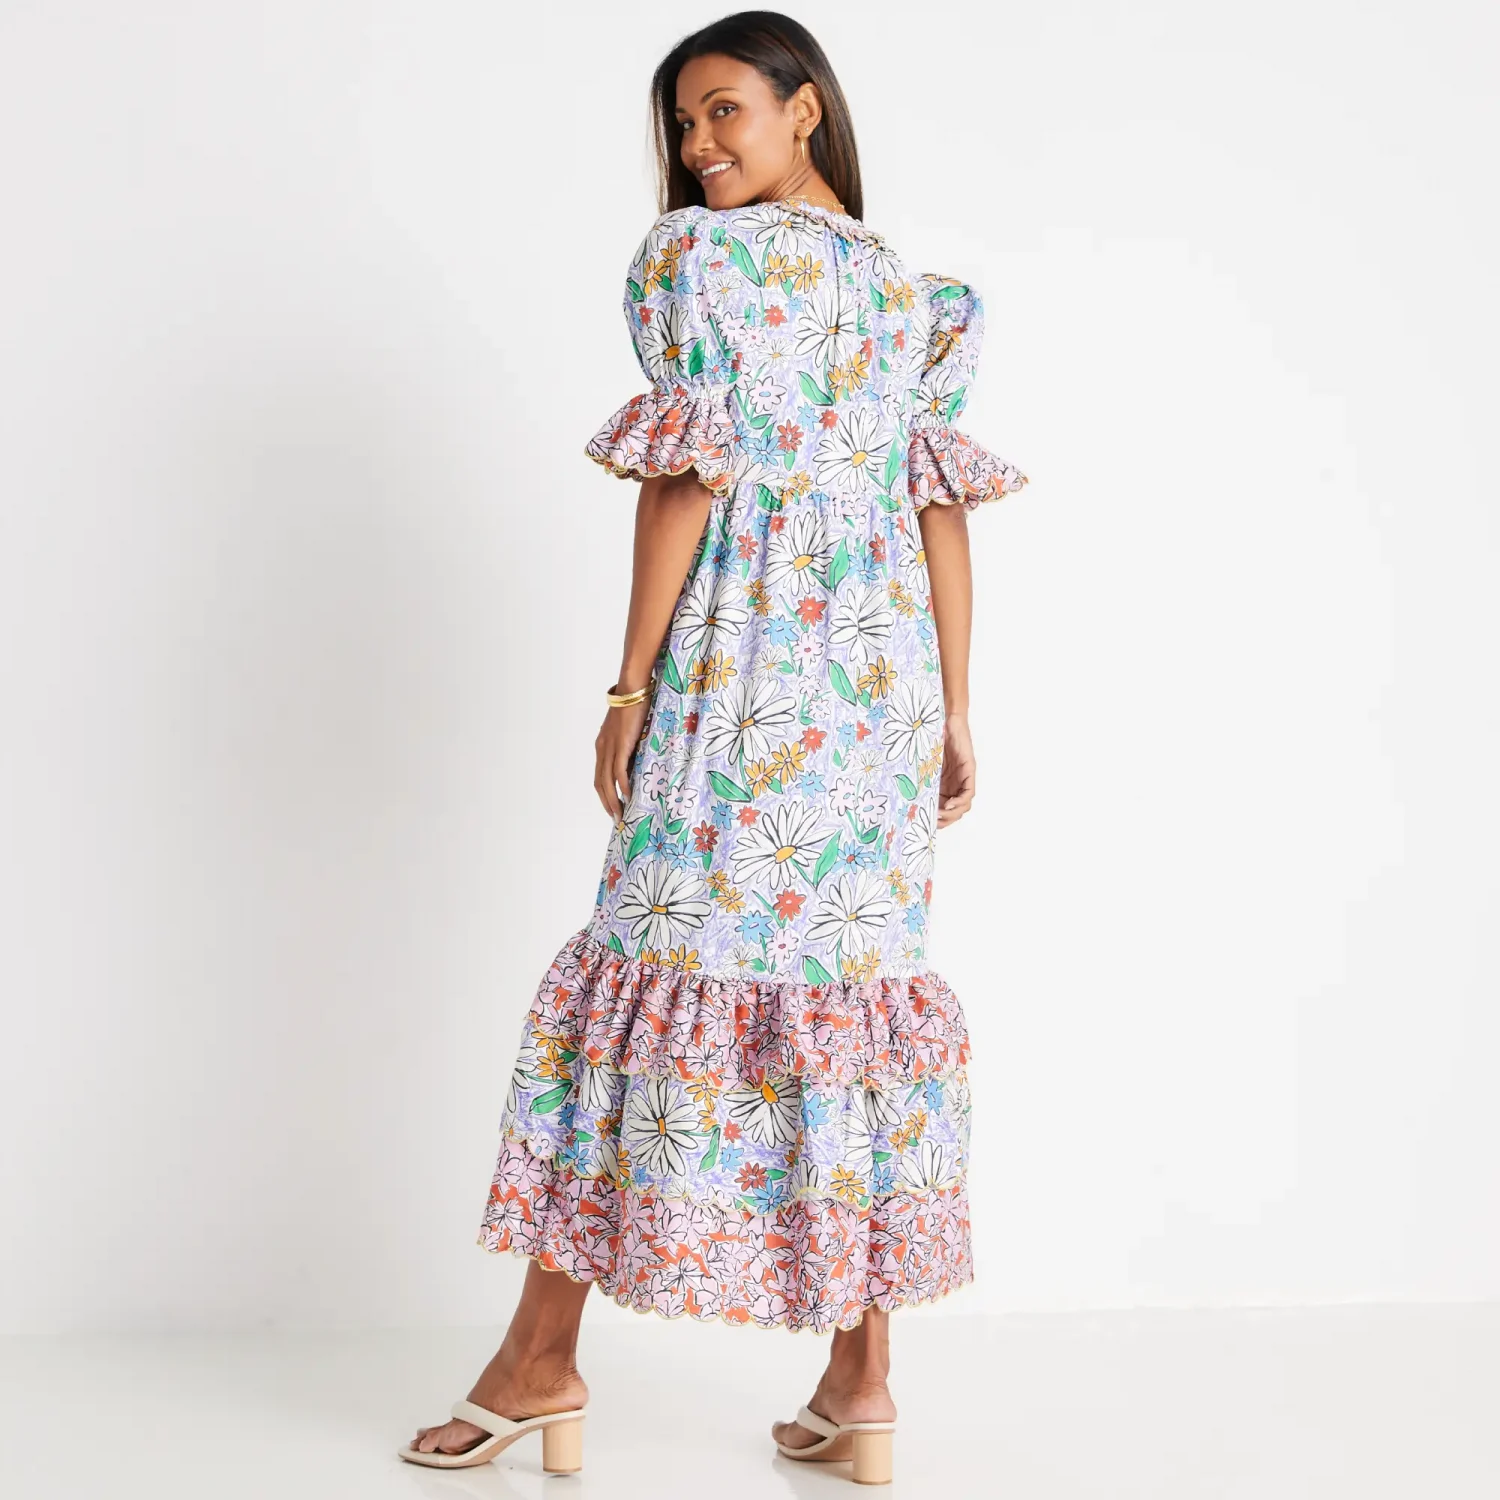 CeliaB brand contemporary and stylish maternity friendly floral printed maxi dresses